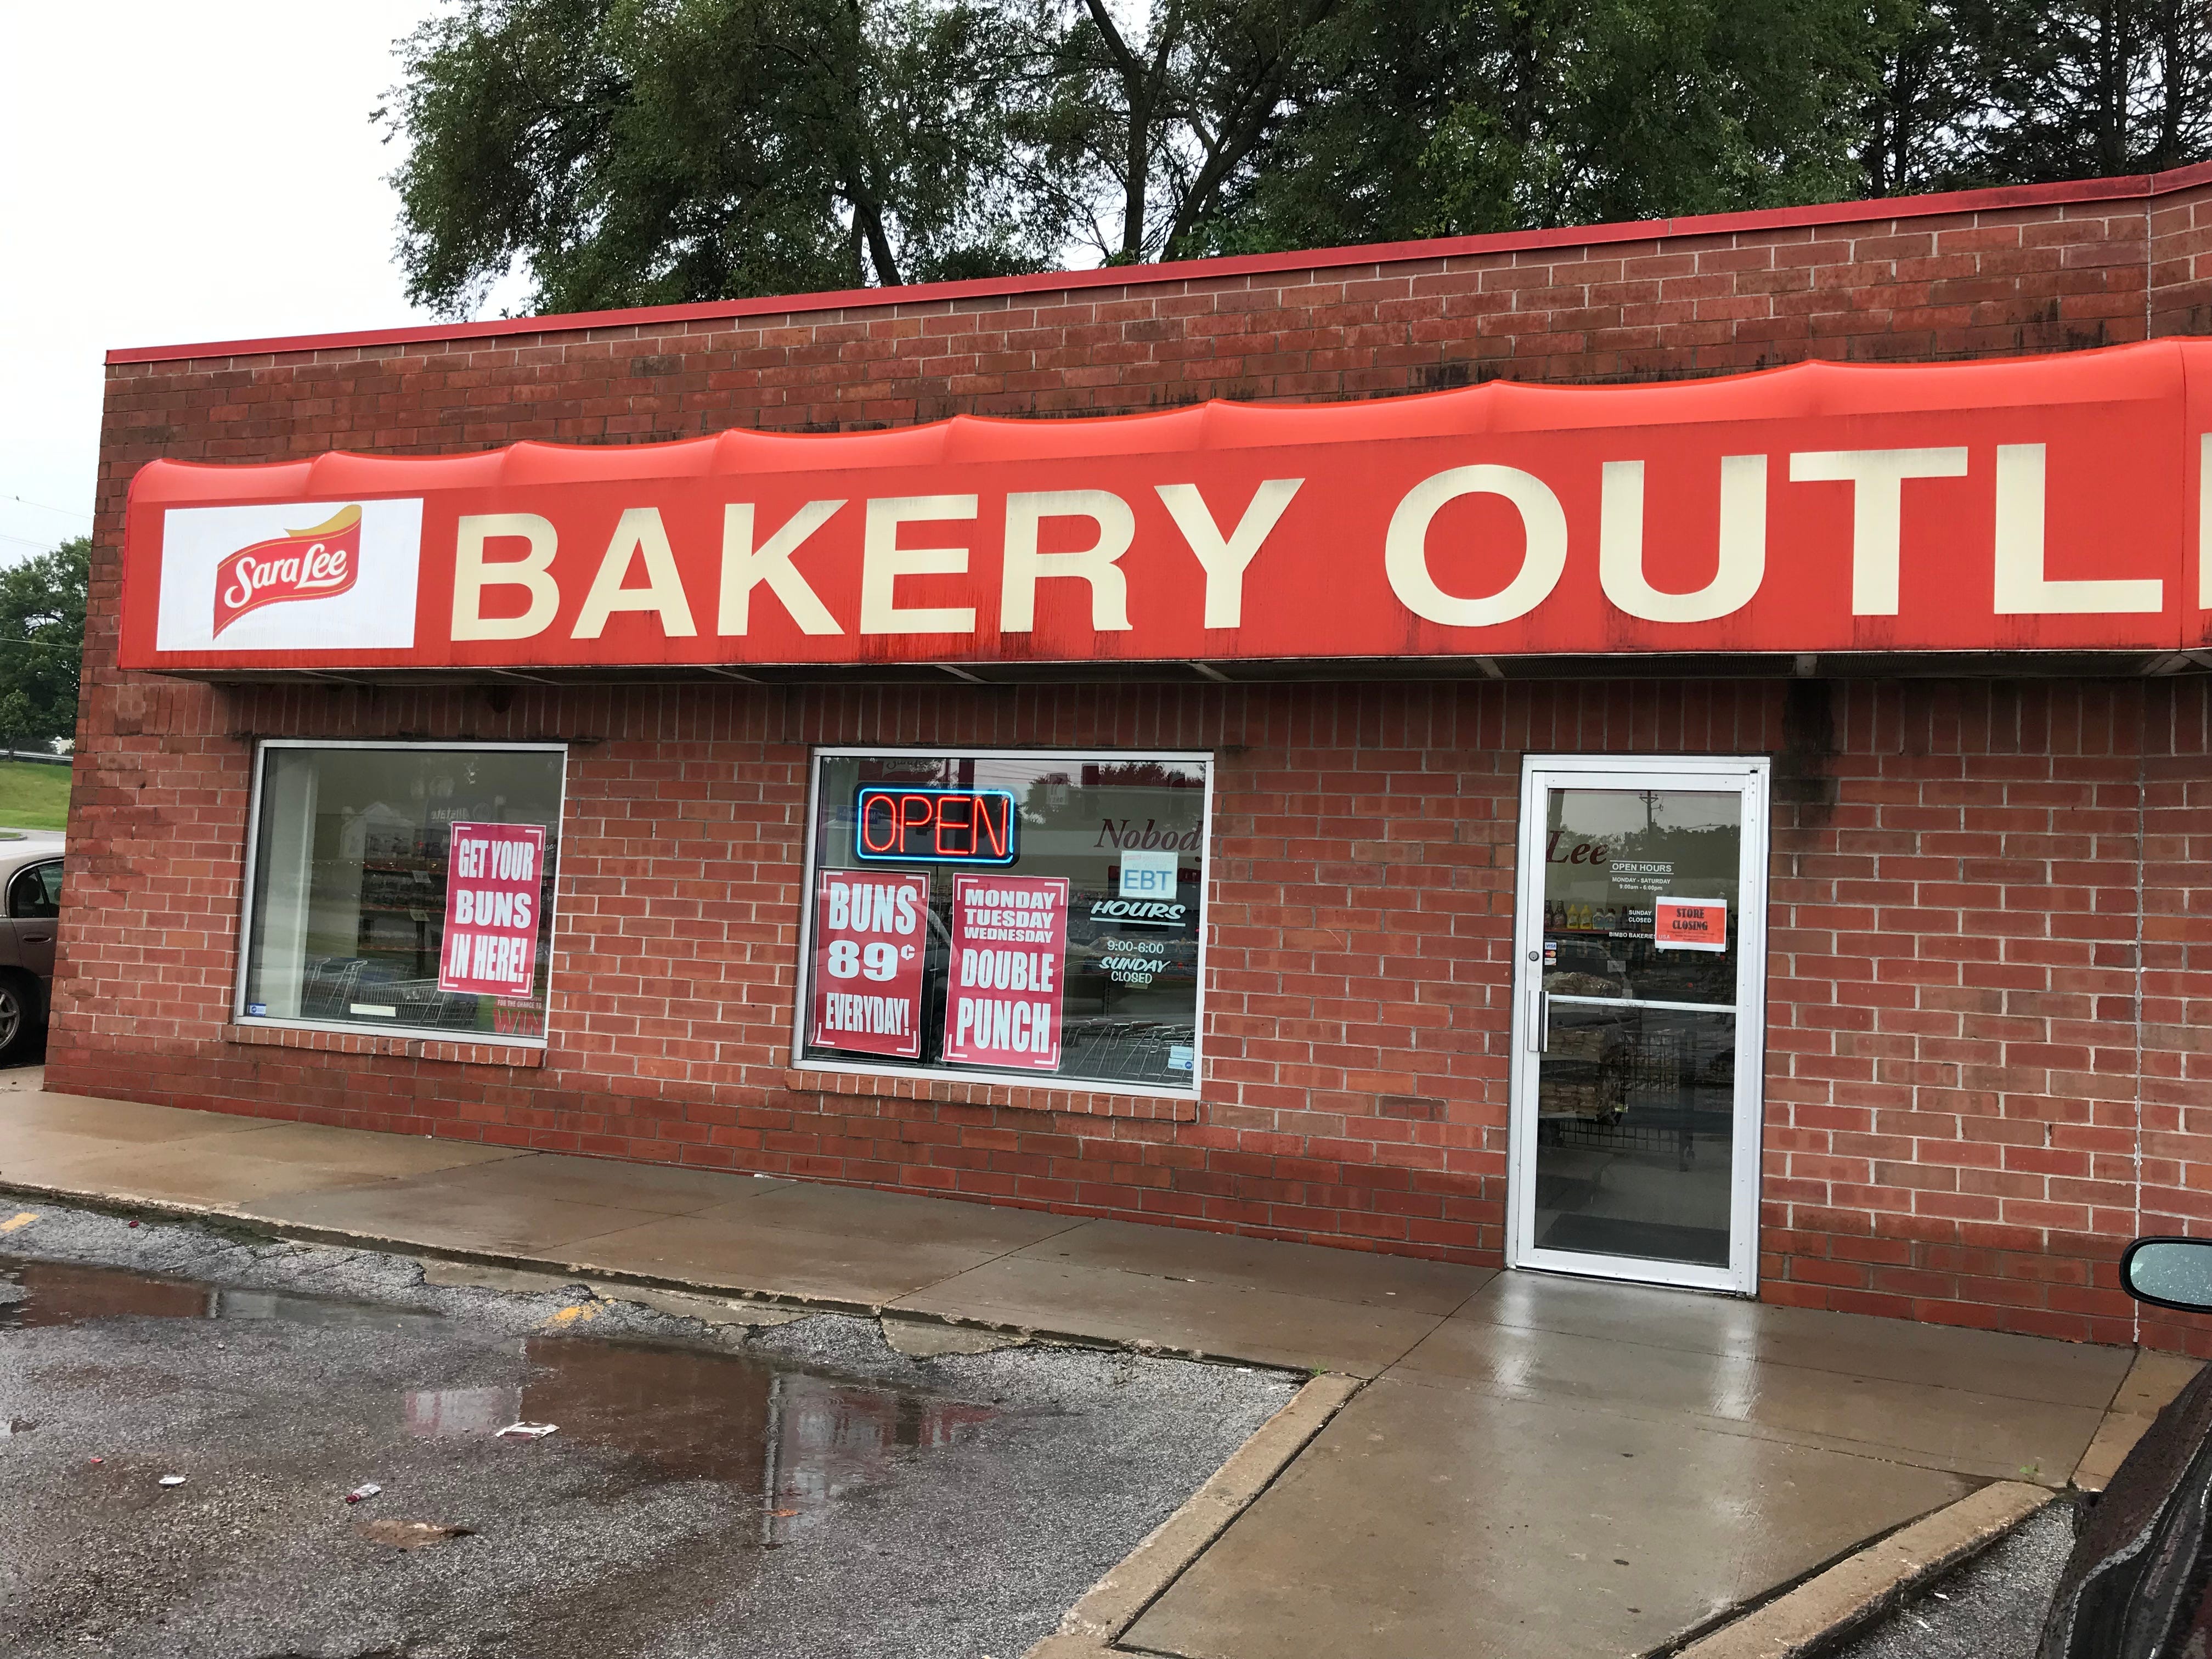 Sara Lee Bakery Outlet is closing in Des Moines